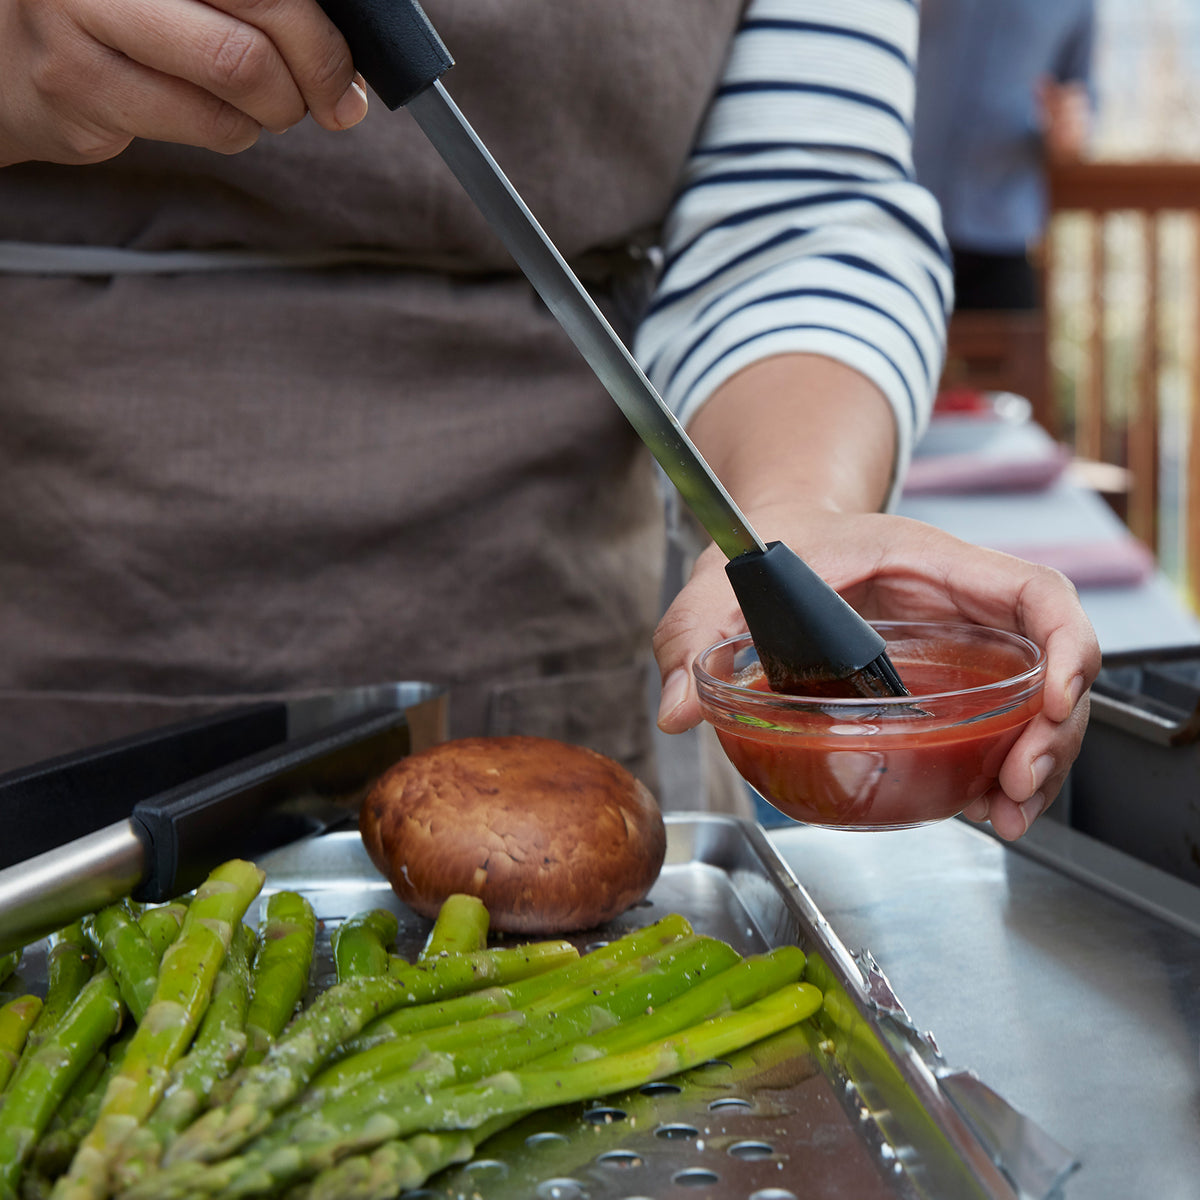 Lifestyle photo, a man preparing to add barbeque sauce to some items on the grill, seen next to fresh asparagus.